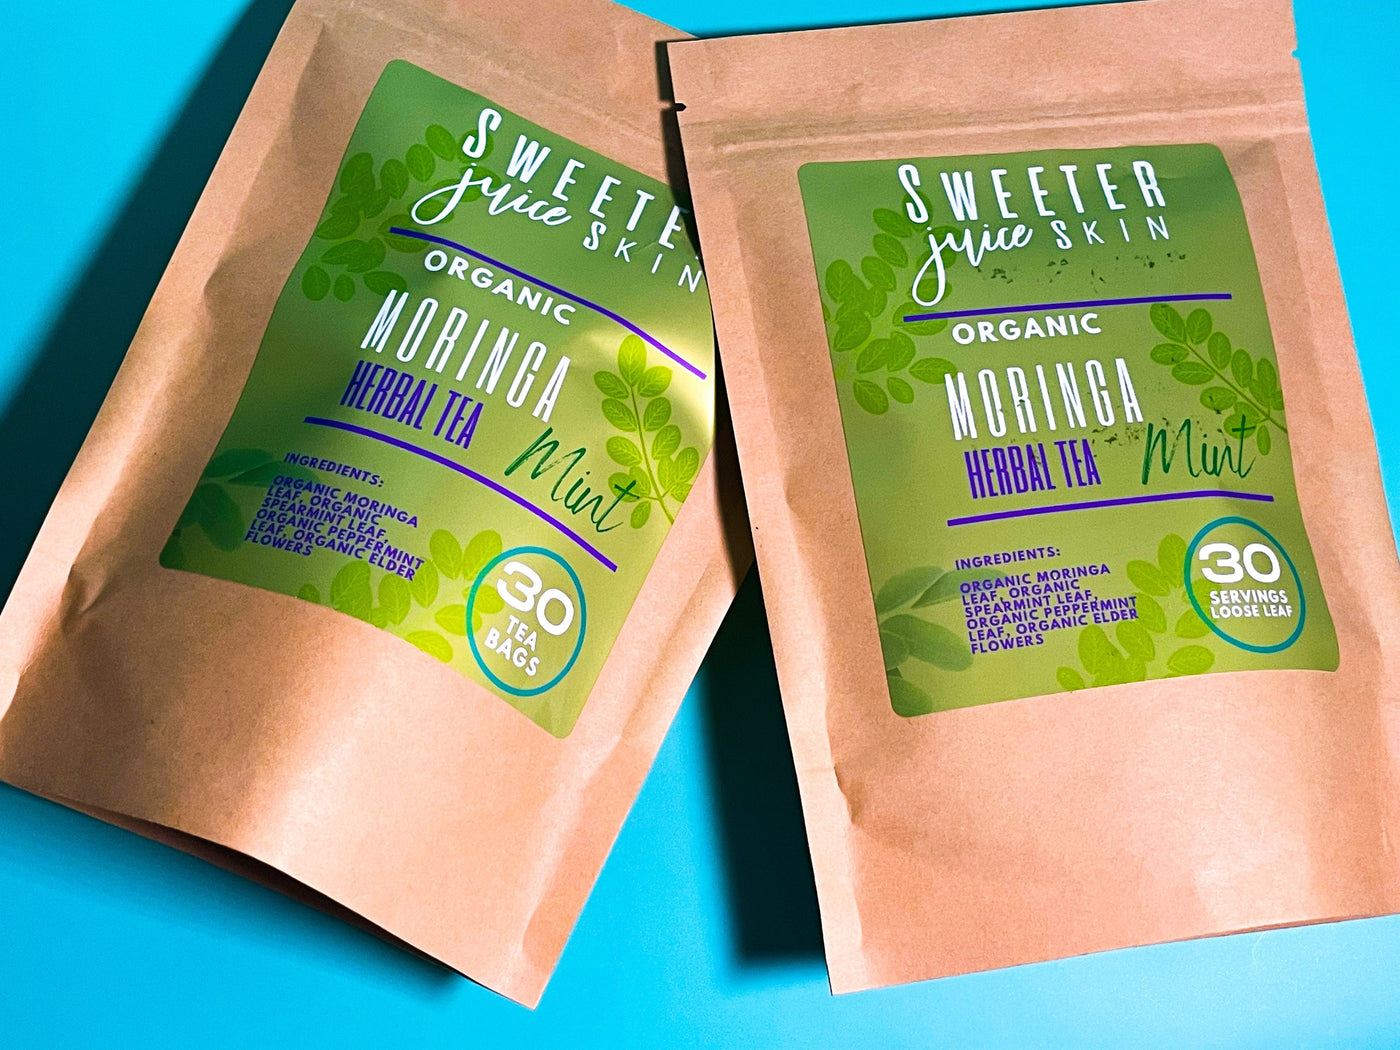 MORINGA INNER + OUTER BEAUTY SYSTEM BY SWEETER JUICE SKIN